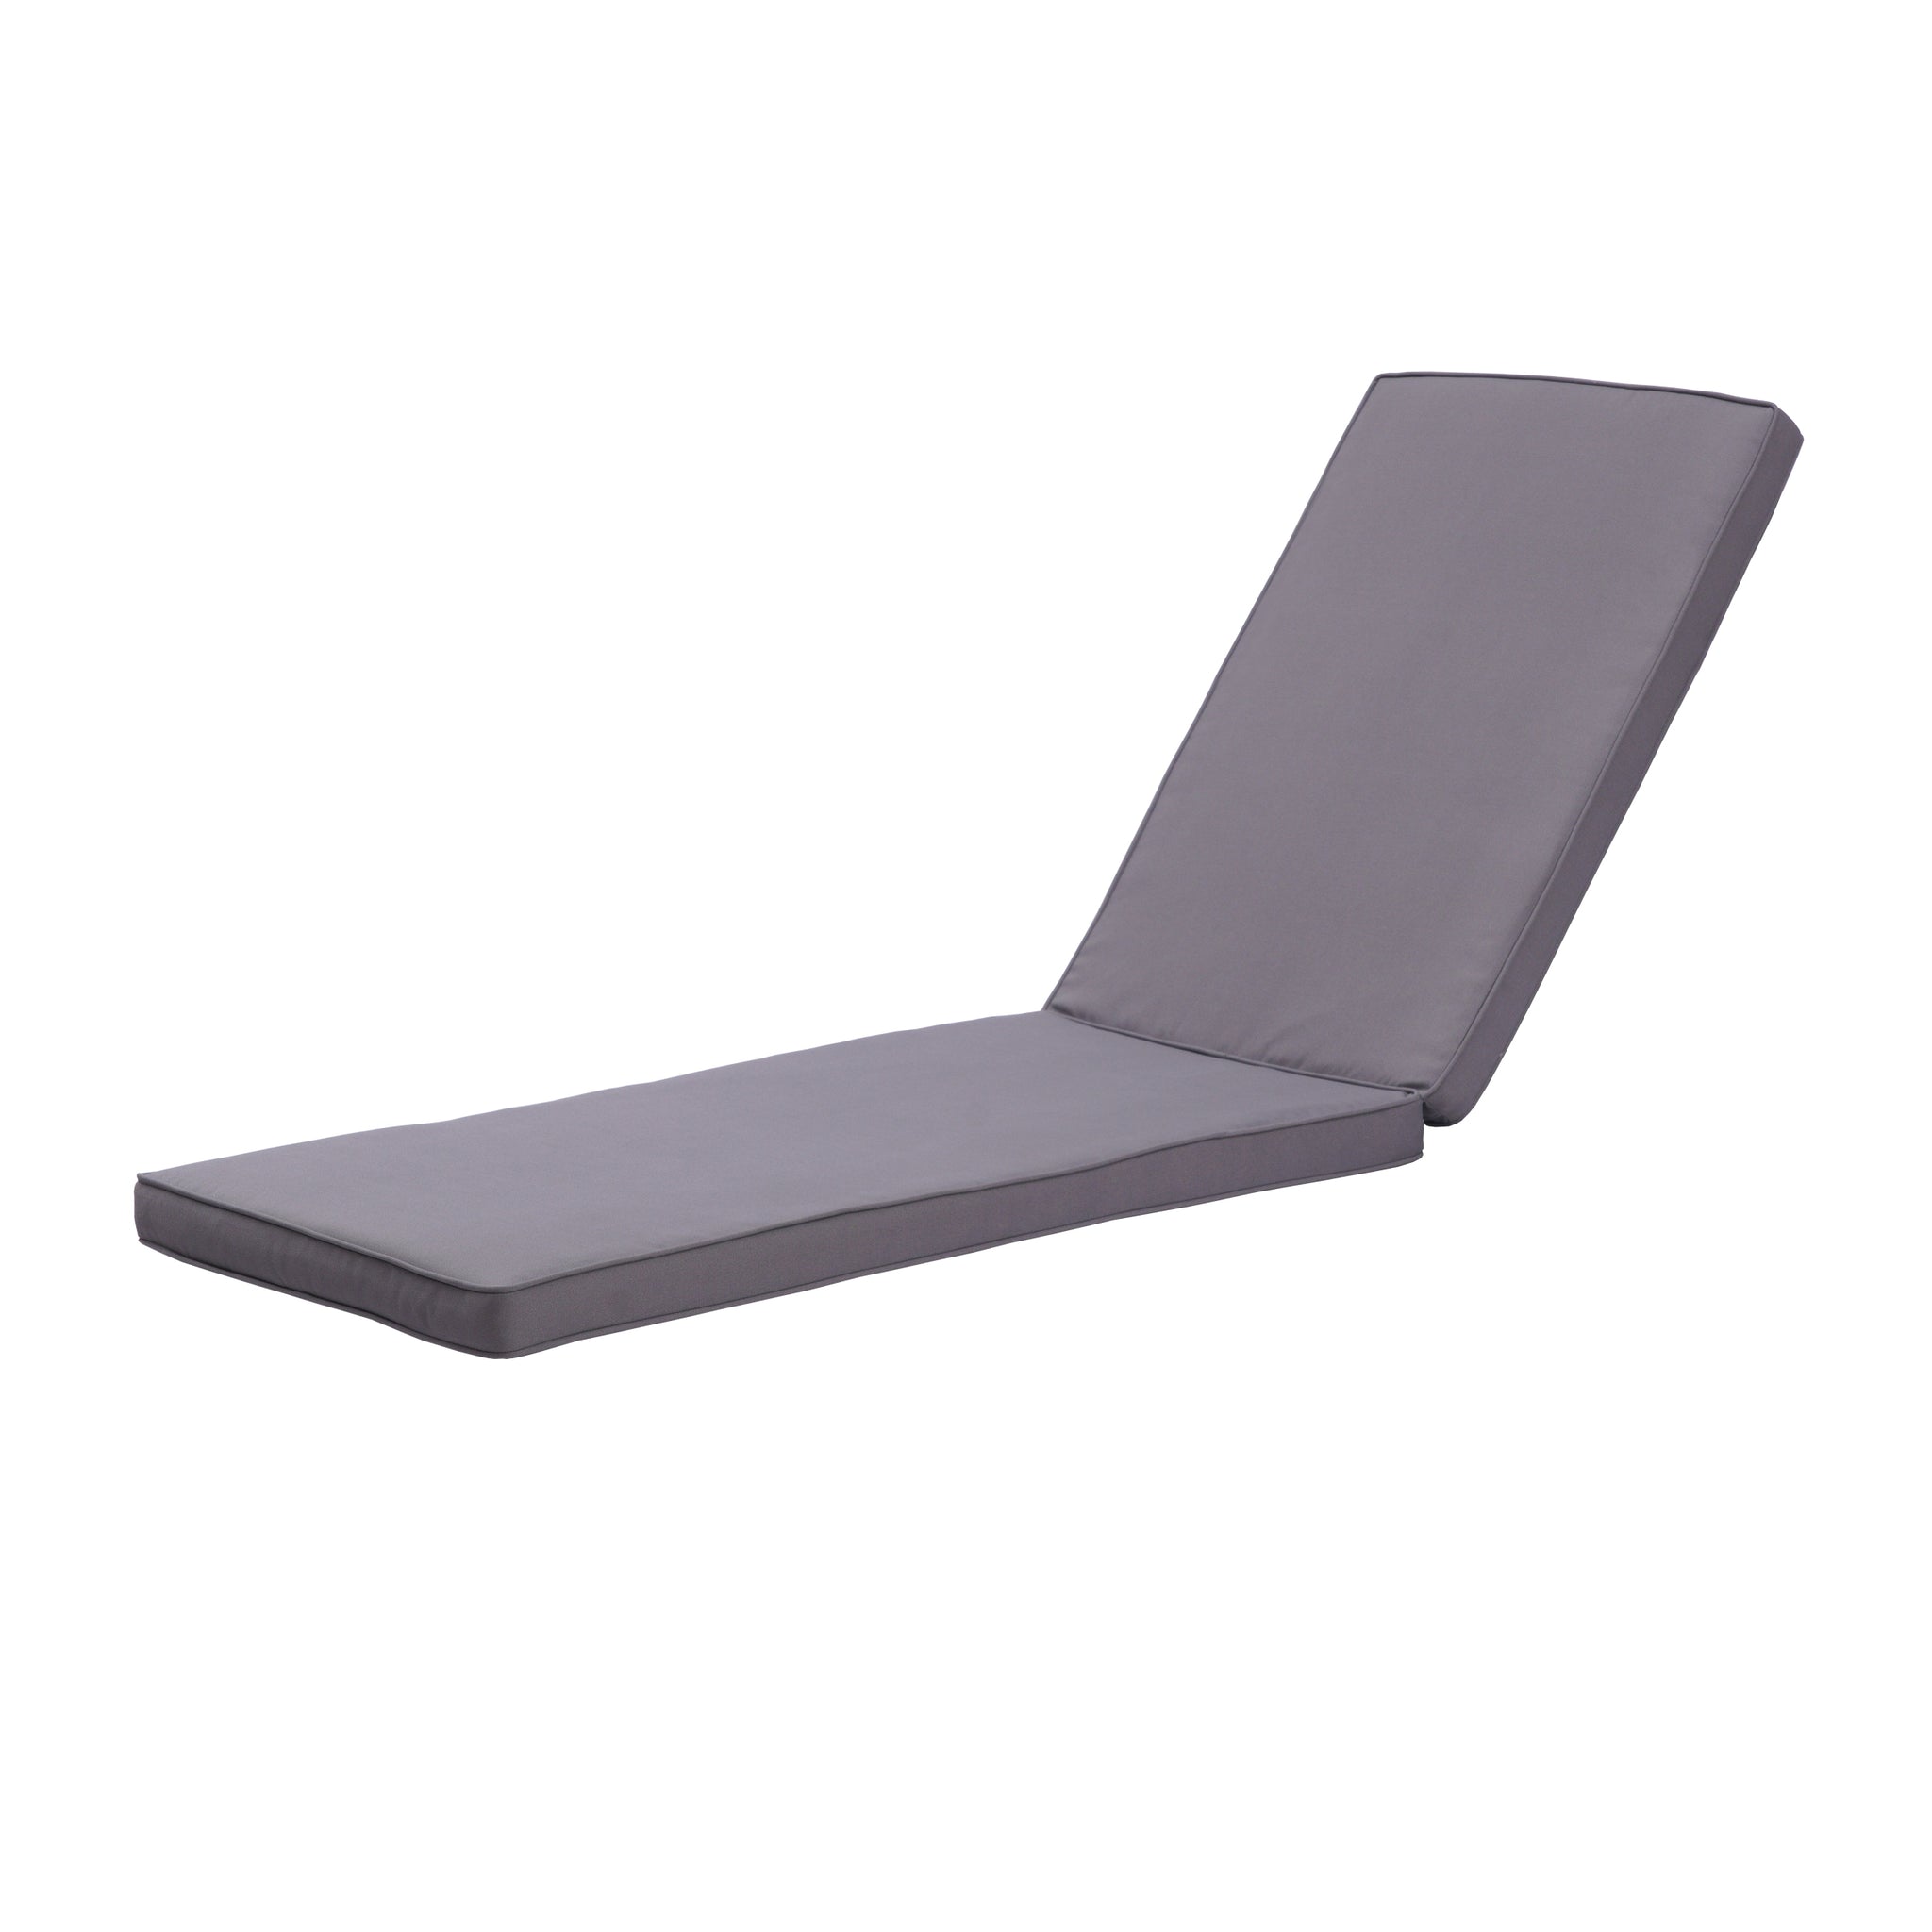 Outdoor Chaise Lounge Chair With Cushion, Five gray-aluminium